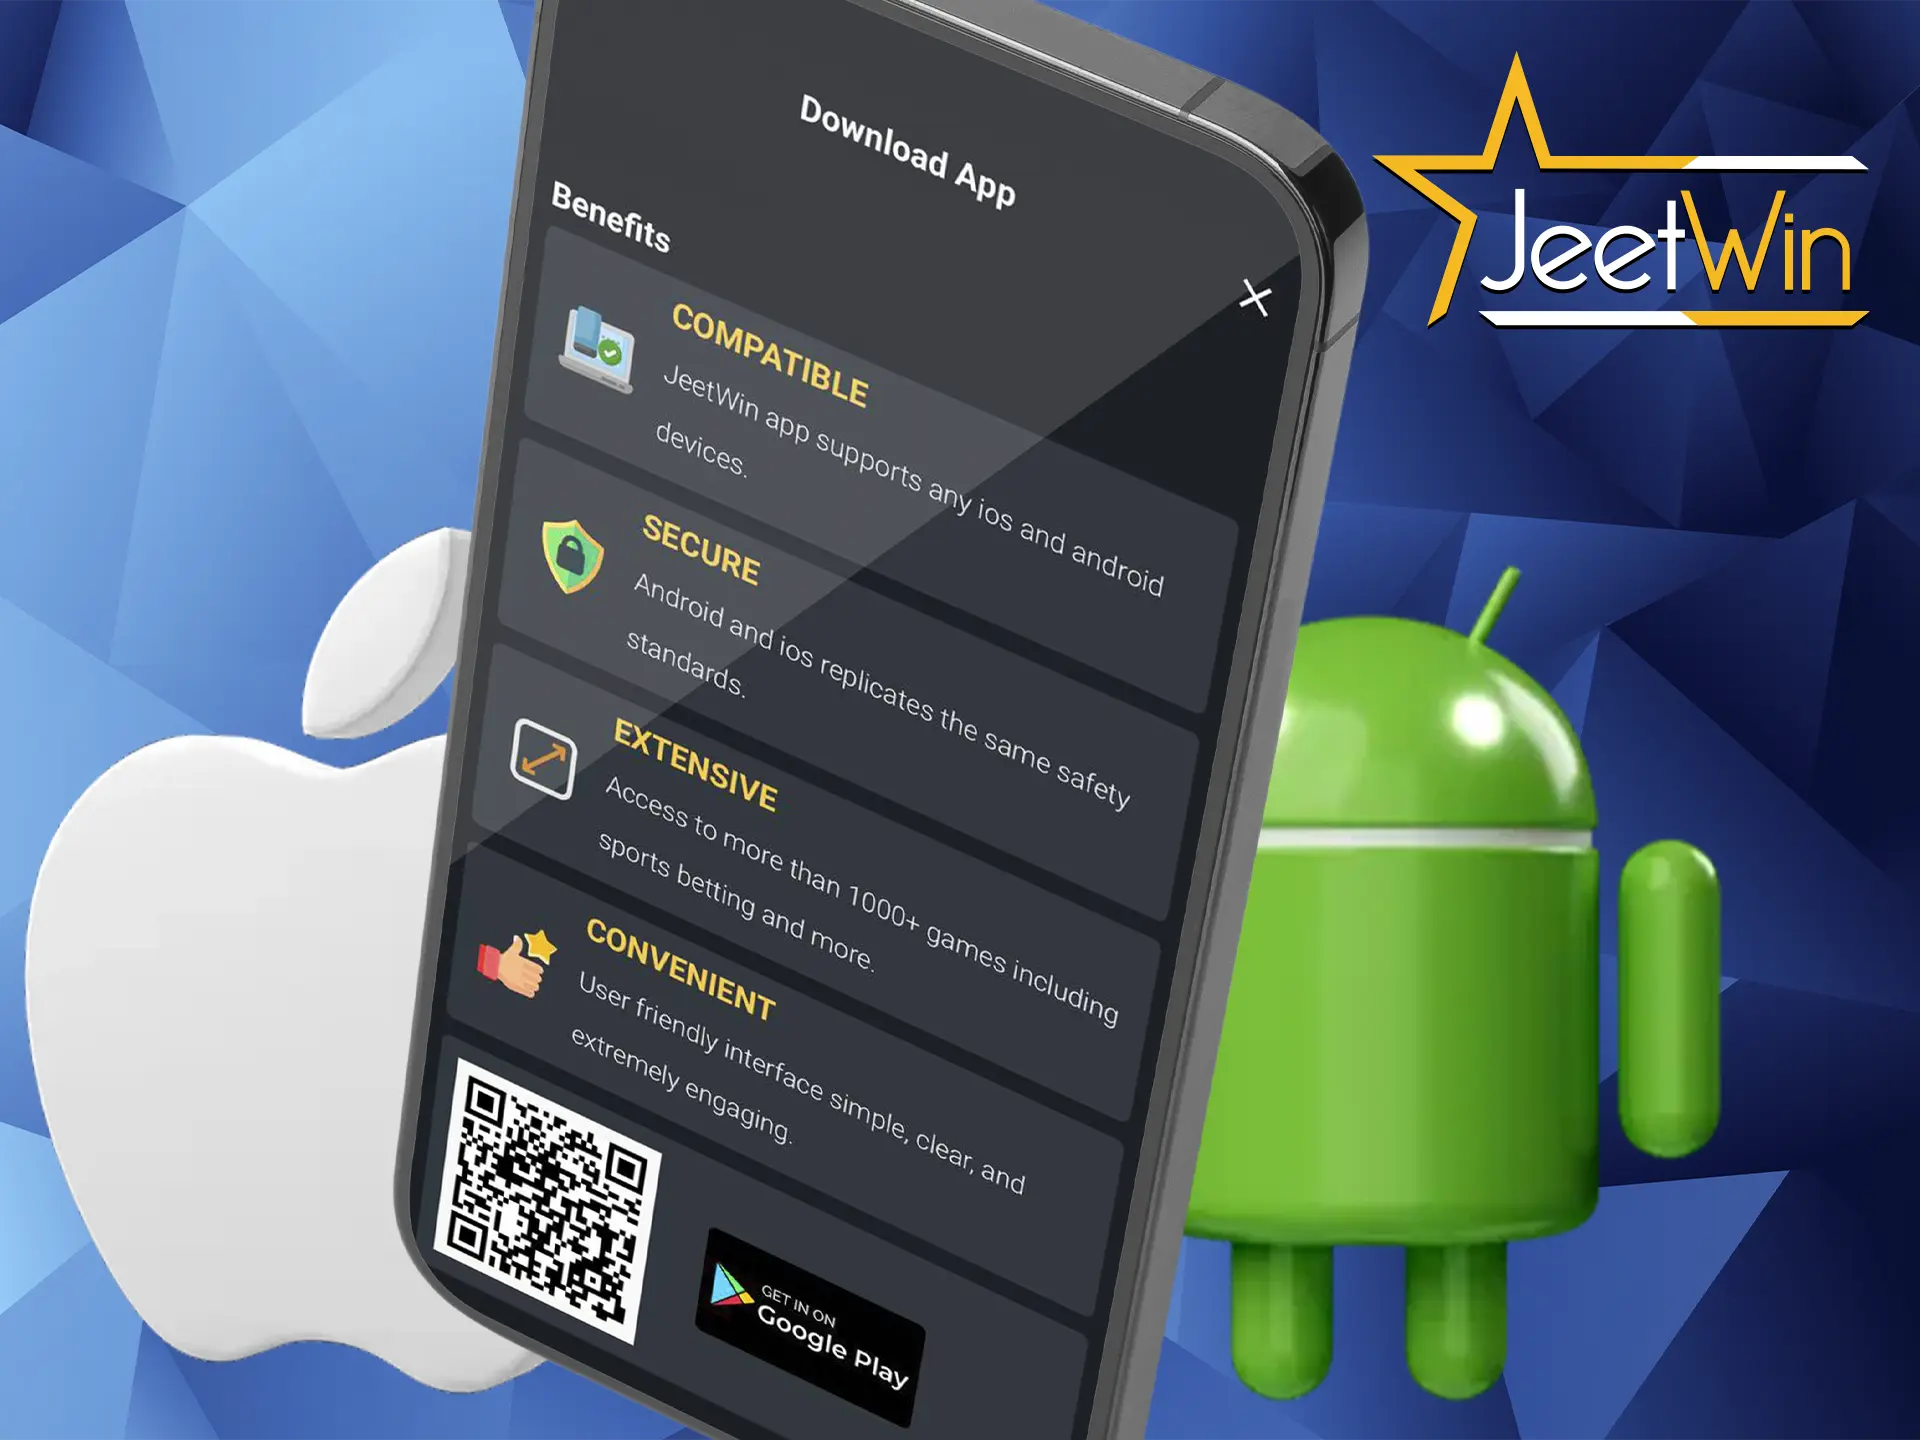 Download the Jeetwin app to be able to log in instantly and make accurate predictions on the cricket event that matters to you.